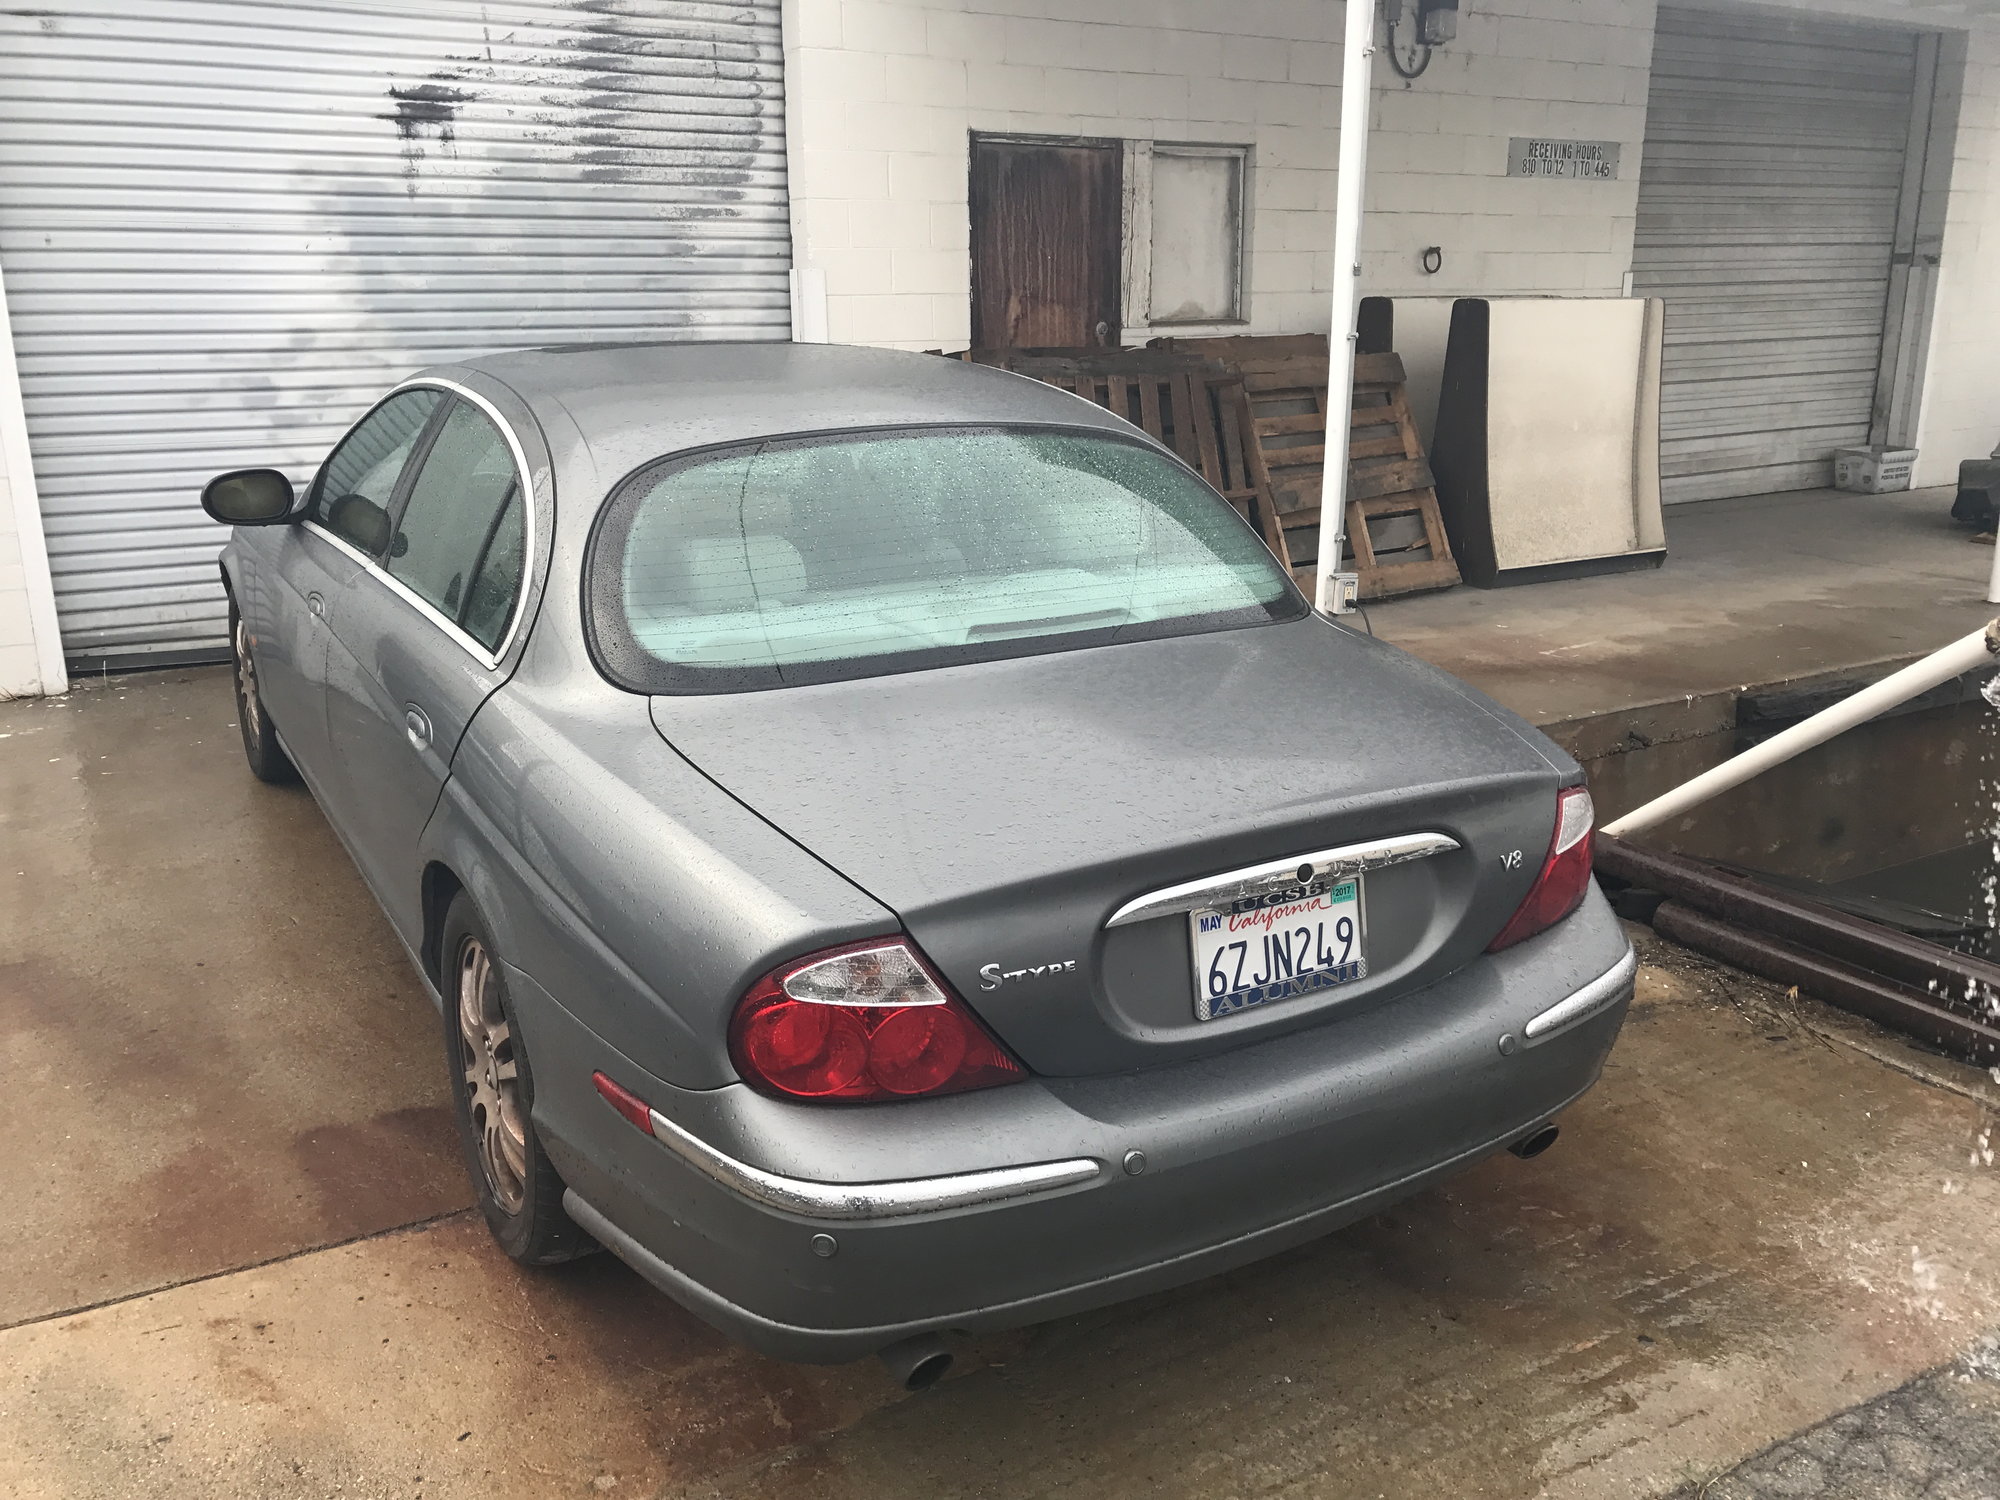 2003 Jaguar S-Type - 2003 Jaguar S-Type 4.2L V8 SALVAGE TITLE Not Currently Running / For Parts or Repair - Used - VIN SAJEA01U13HM86524 - 254,000 Miles - 8 cyl - 2WD - Automatic - Sedan - Gray - Montclair, CA 91763, United States